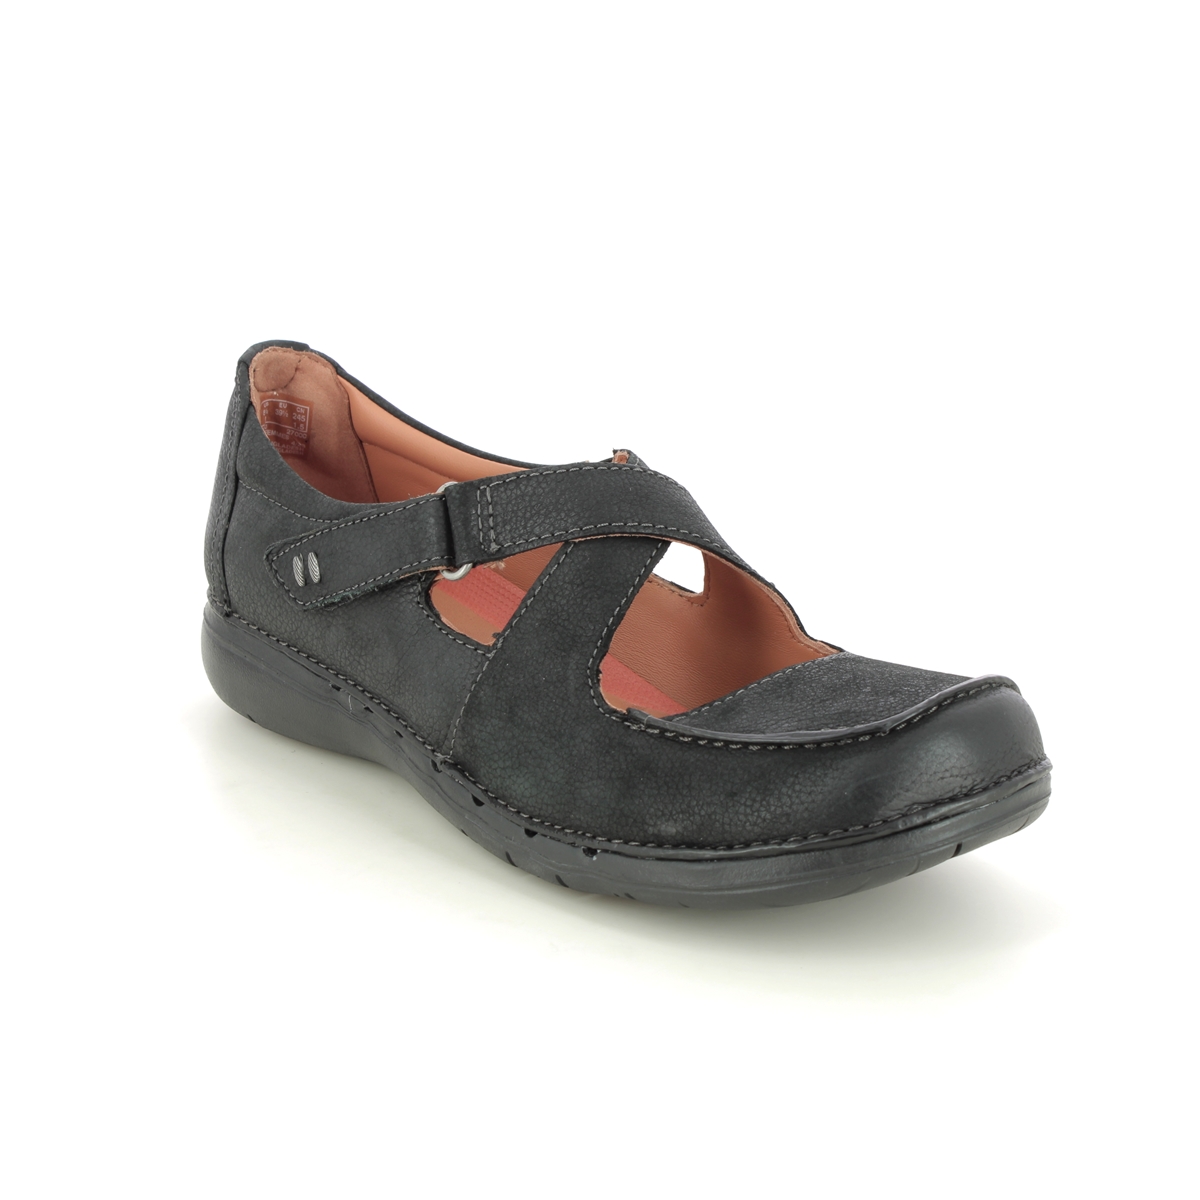 Clarks Un Loop Strap Black Leather Womens Mary Jane Shoes 749704D In Size 7 In Plain Black Leather